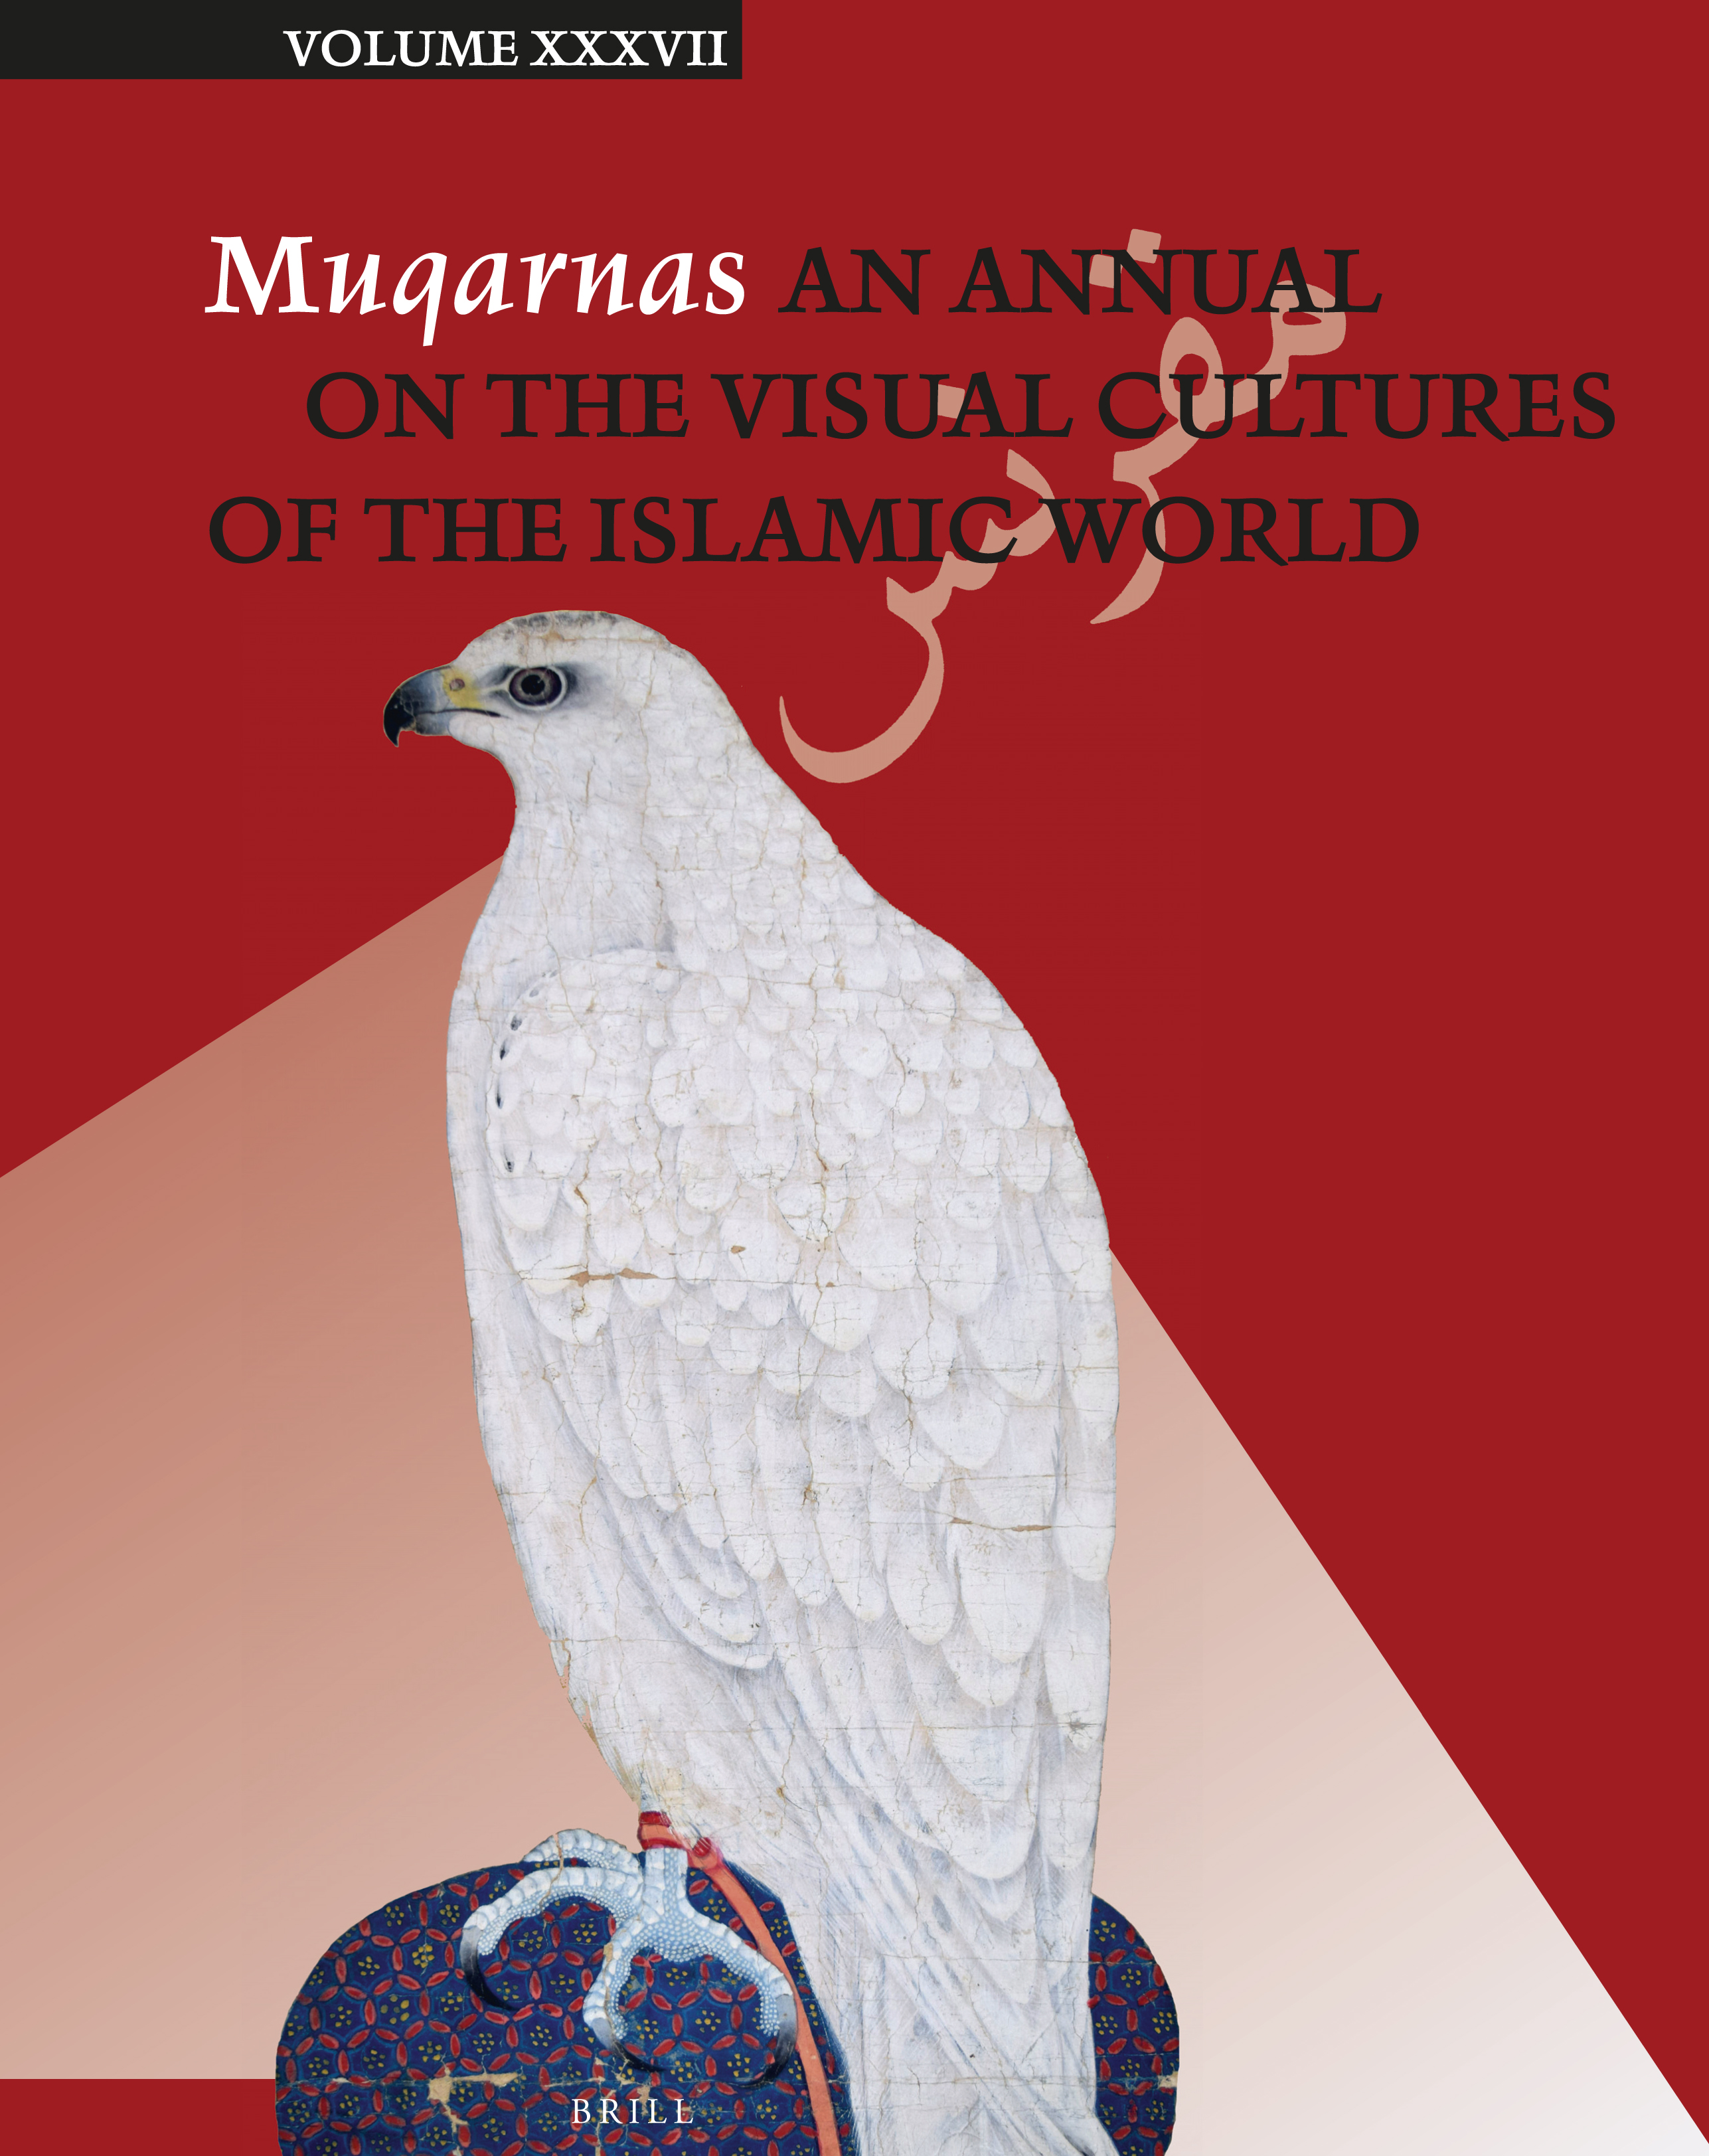 Gülru Necipoğlu - <p><em>Muqarnas</em>&nbsp;37 introduces new research on Islamic material culture ranging from <a href="https://www.archnet.org/collections/2352" rel="noopener noreferrer" target="_blank">Abbasid</a> period mosaics to the early twentieth-century art market. Featured articles include Charles Melville’s introduction of a chronicle that sheds light on the architectural program of <a href="https://www.archnet.org/authorities/2598" rel="noopener noreferrer" target="_blank">Shah ʿAbbas I</a>, in particular his patronage of the dynastic shrine at <a href="https://www.archnet.org/authorities/3513" rel="noopener noreferrer" target="_blank">Ardabil</a>. From the <a href="https://www.archnet.org/collections/2368" rel="noopener noreferrer" target="_blank">Ottoman period</a>, two essays discuss painted manuscripts: the first traces shifting representations of urban space in late sixteenth-century <a href="https://www.archnet.org/authorities/3711" rel="noopener noreferrer" target="_blank">Istanbul</a>, and the second focuses on sumptuous objects—namely, candy gardens and decorated palms—accompanying the extraordinary 1720 circumcision festival under <a href="https://www.archnet.org/authorities/2636" rel="noopener noreferrer" target="_blank">Sultan Ahmed III</a>. Another article seeks to unravel the mysterious origins of an unusually sophisticated painting of <a href="https://www.archnet.org/authorities/5337" rel="noopener noreferrer" target="_blank">Mecca</a> from the seventeenth or eighteenth century. Other topics covered are archaeological finds in Tunisia, and the legacy of Russian modernization efforts in the architecture of East Anatolia, especially the city of Kars. The Notes and Sources section examines the&nbsp;<em>waqfiyya</em>&nbsp;of the earliest surviving Halveti lodge in Amasya, as well as the function of various types of lamps in contemporary Pakistani Sufi shrines.</p>